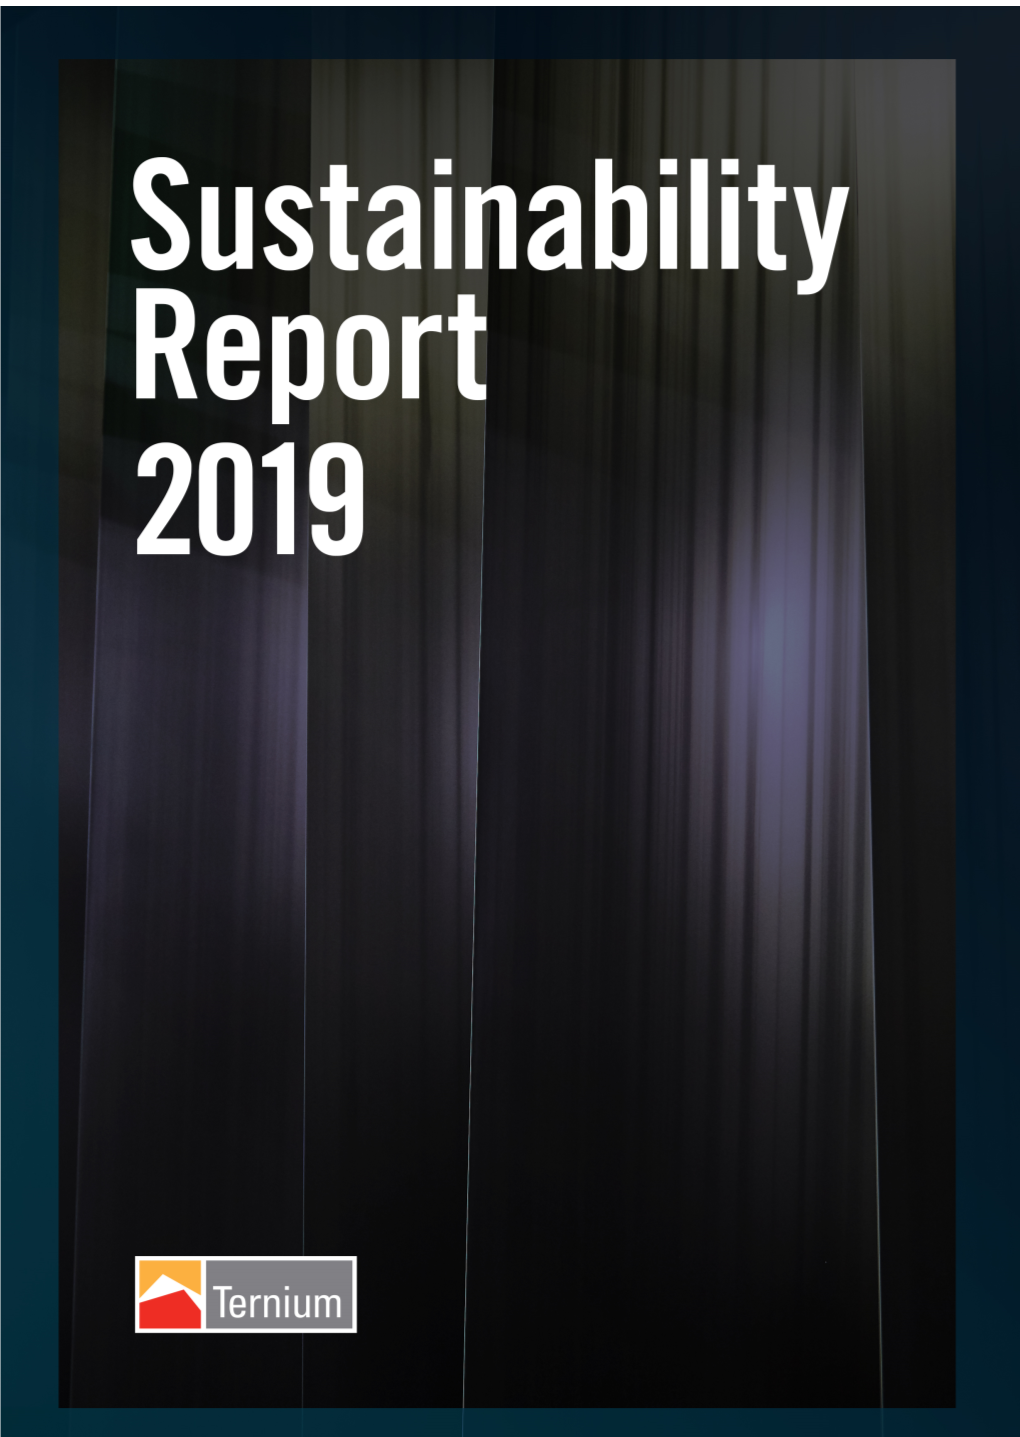 Read the 2019 Sustainability Report